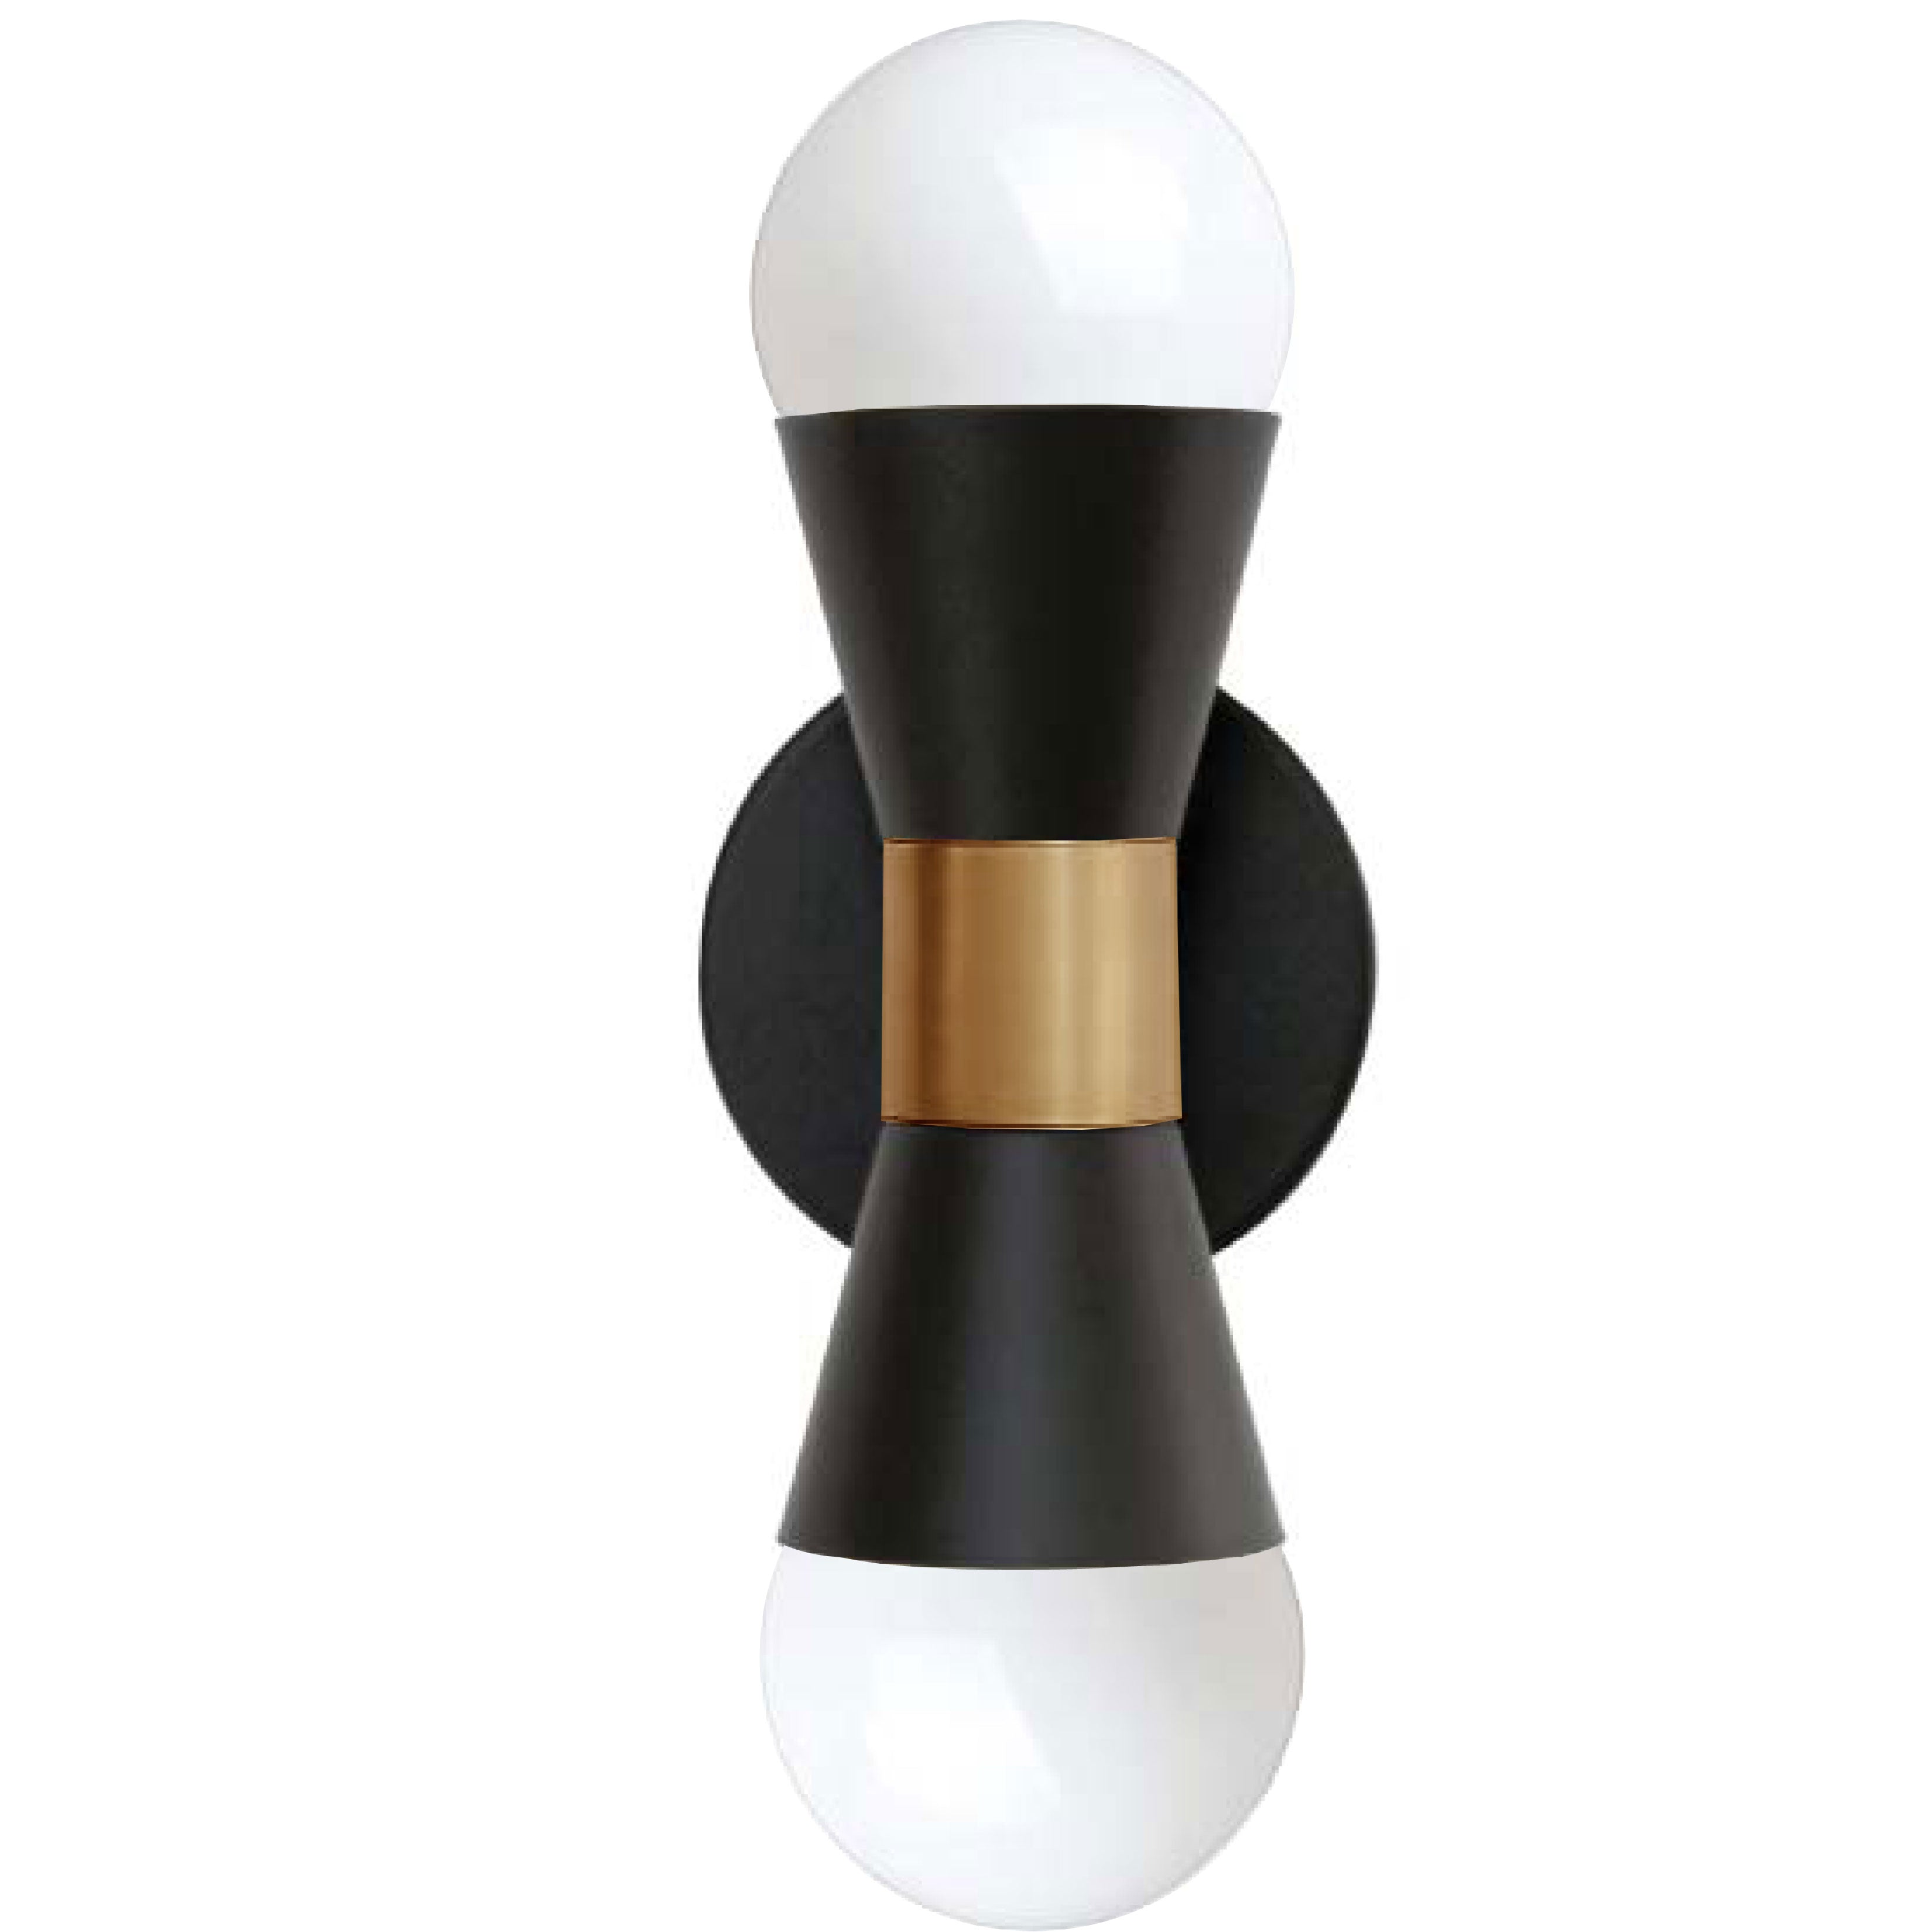 FORTUNA Wall sconce Black - FOR-72W-MB-AGB | DAINOLITE